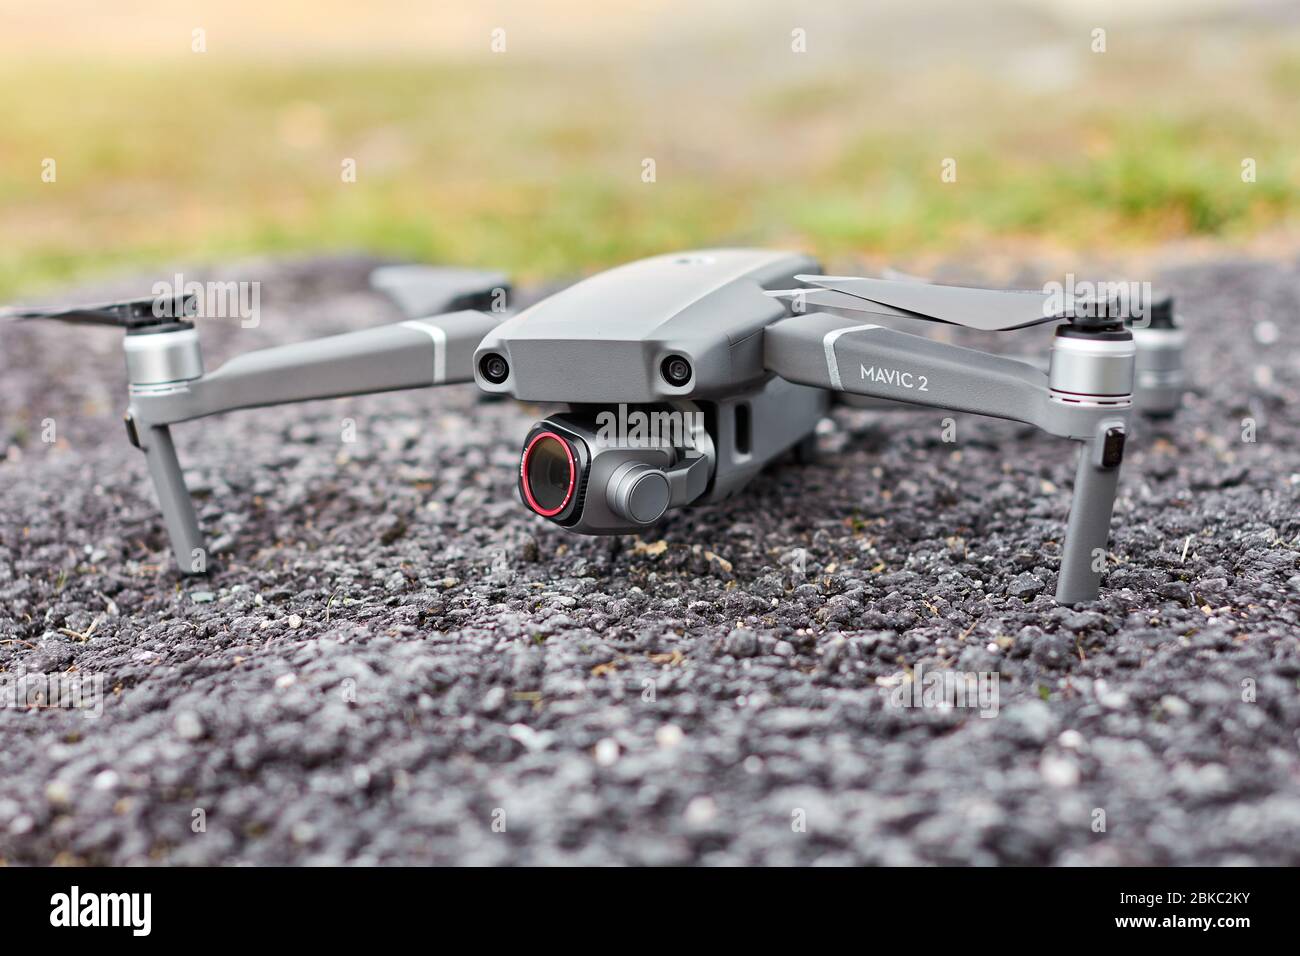 DJI Mavic 2 Pro Drone with Hasselblad camera and Freewell ND filter is ready to take off, Chicago, May 2020. Stock Photo